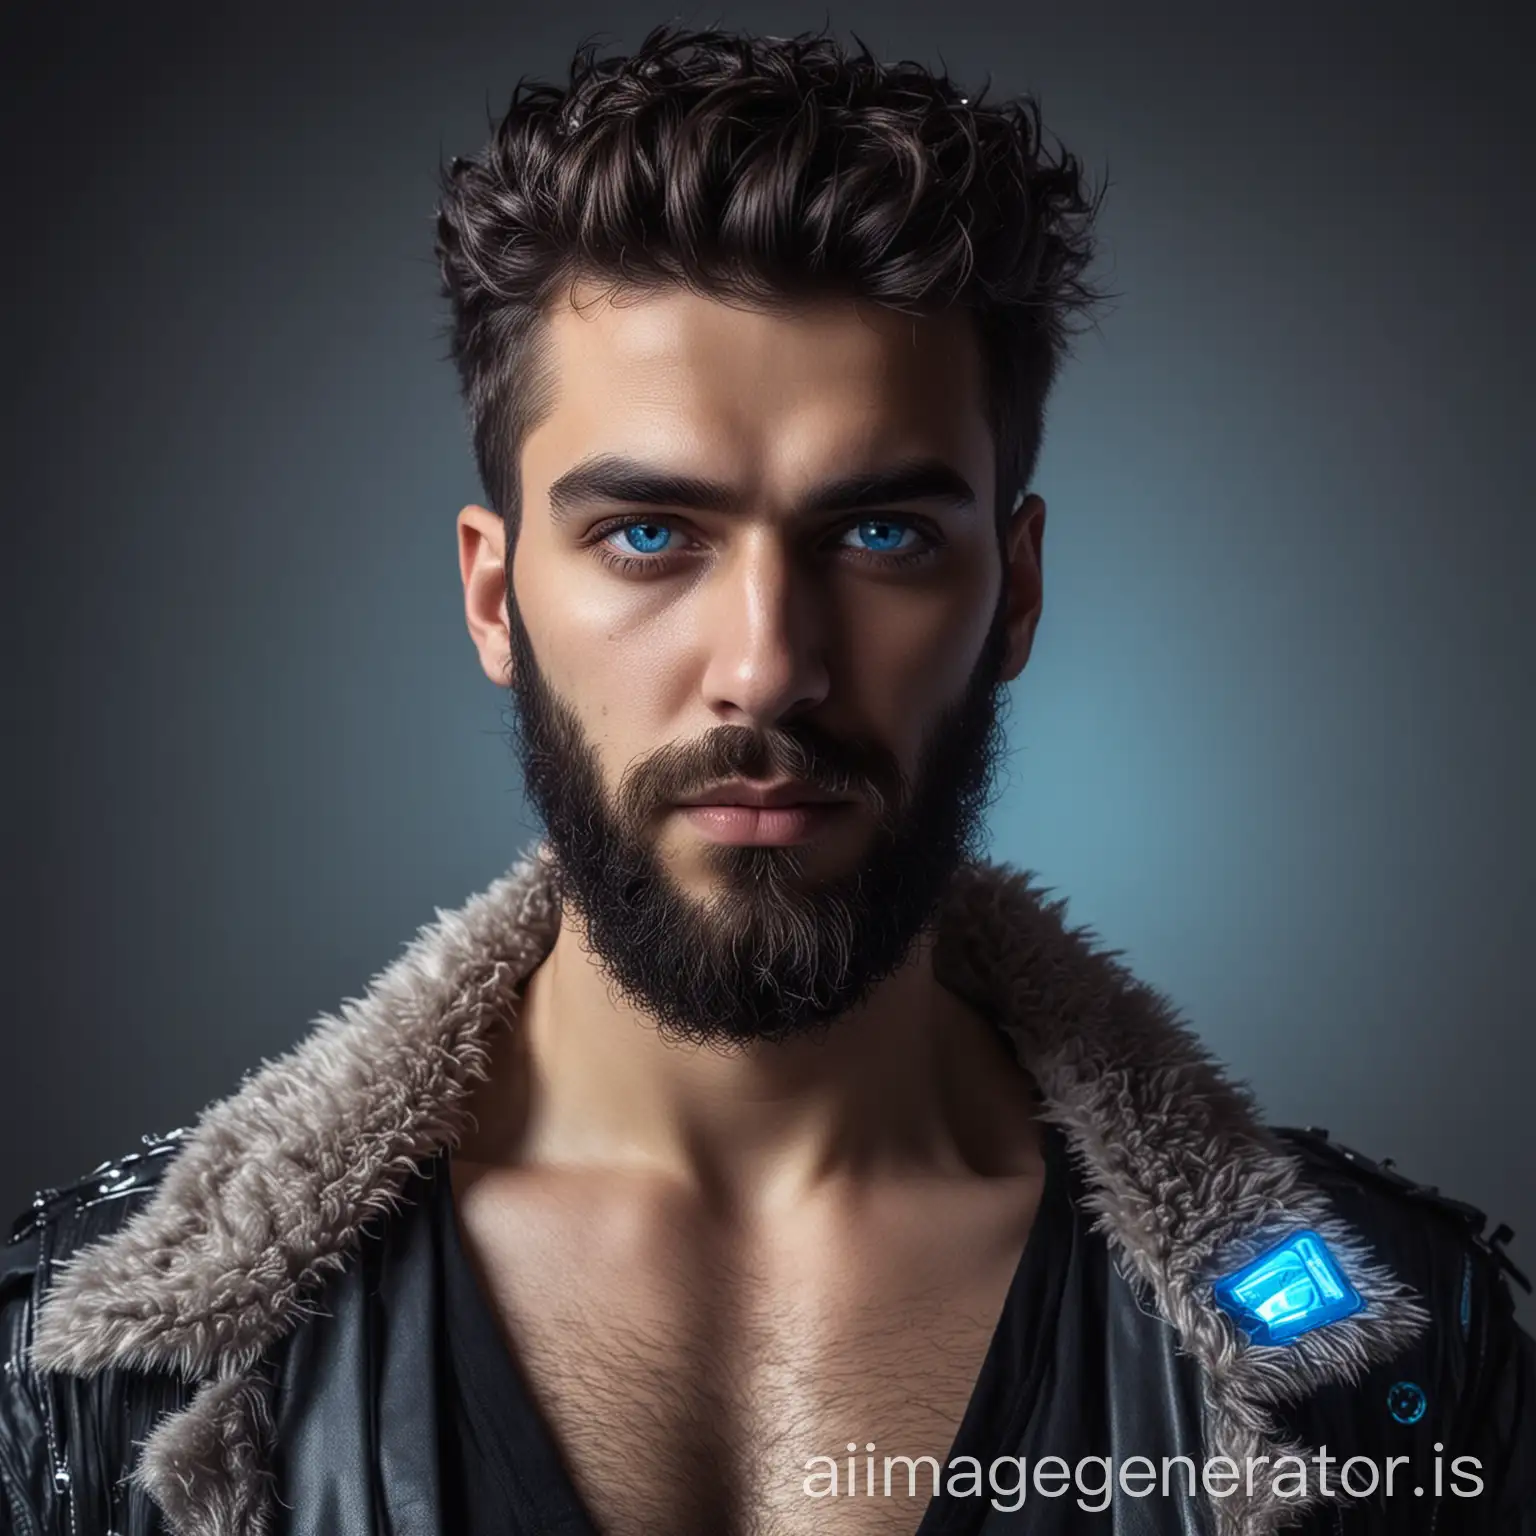 cyberpunk portrait, wide angle. Middle eastern man. Shining neon blue eyes. Trimmed beard. Hirsute. Wavy hair in a modern style, fade cut. Elegant clothes reveal a very hairy chest. Holographic hacker elements.